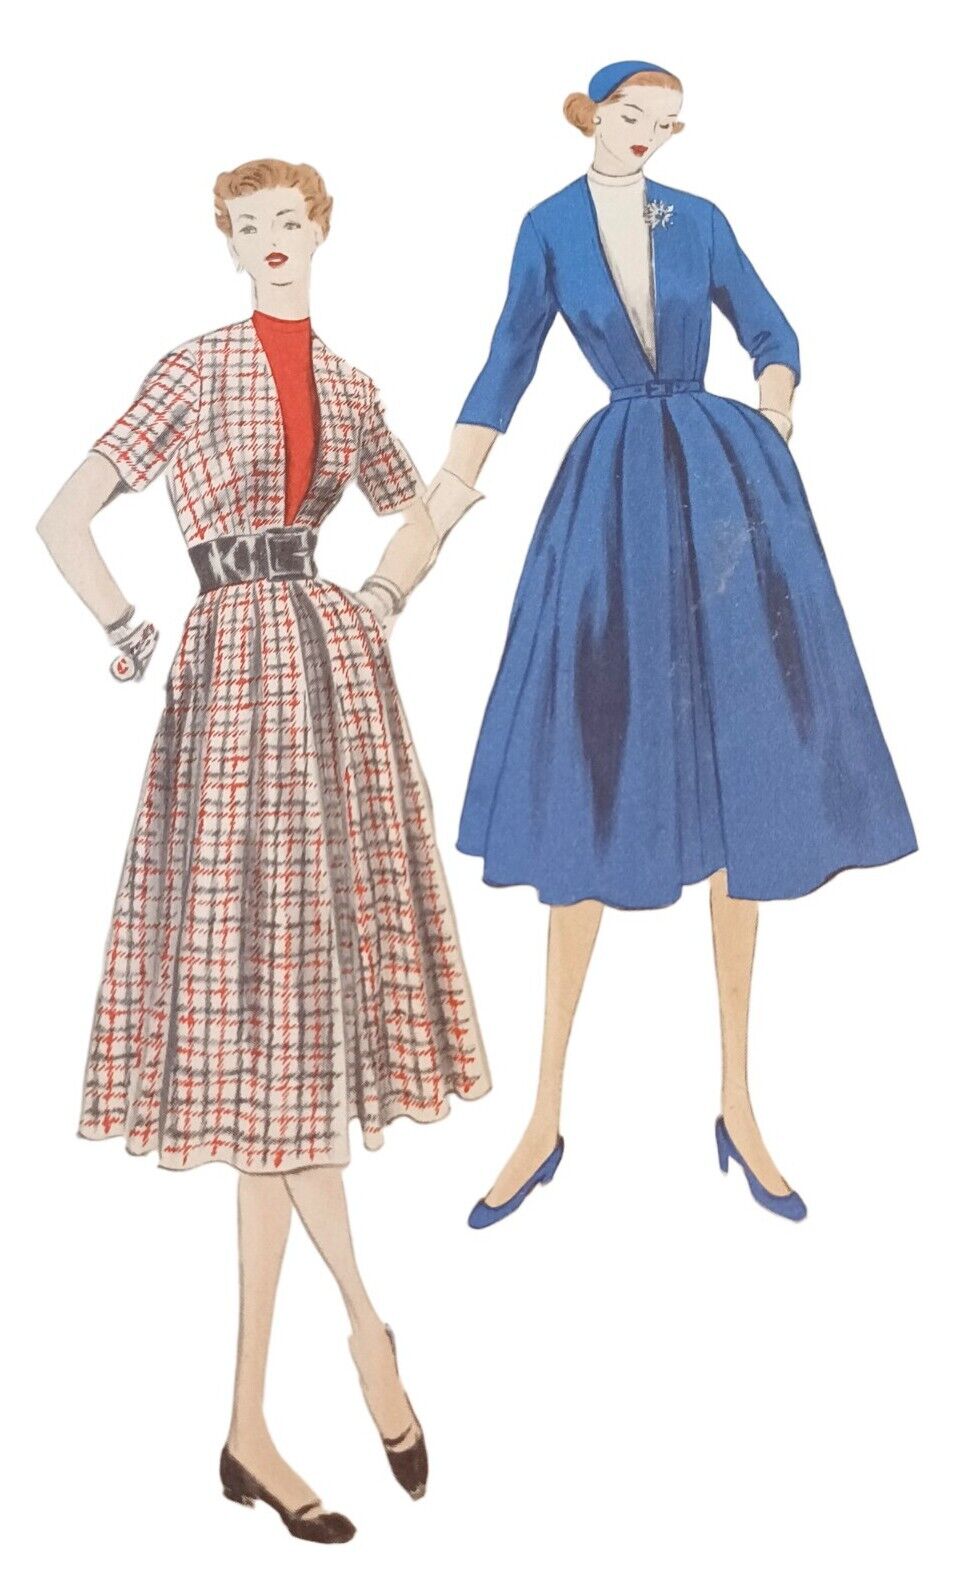 Vtg 1952 Vogue Pattern 7761 One Piece Dress and Blouse Size 14 Bust 32 Hip 35